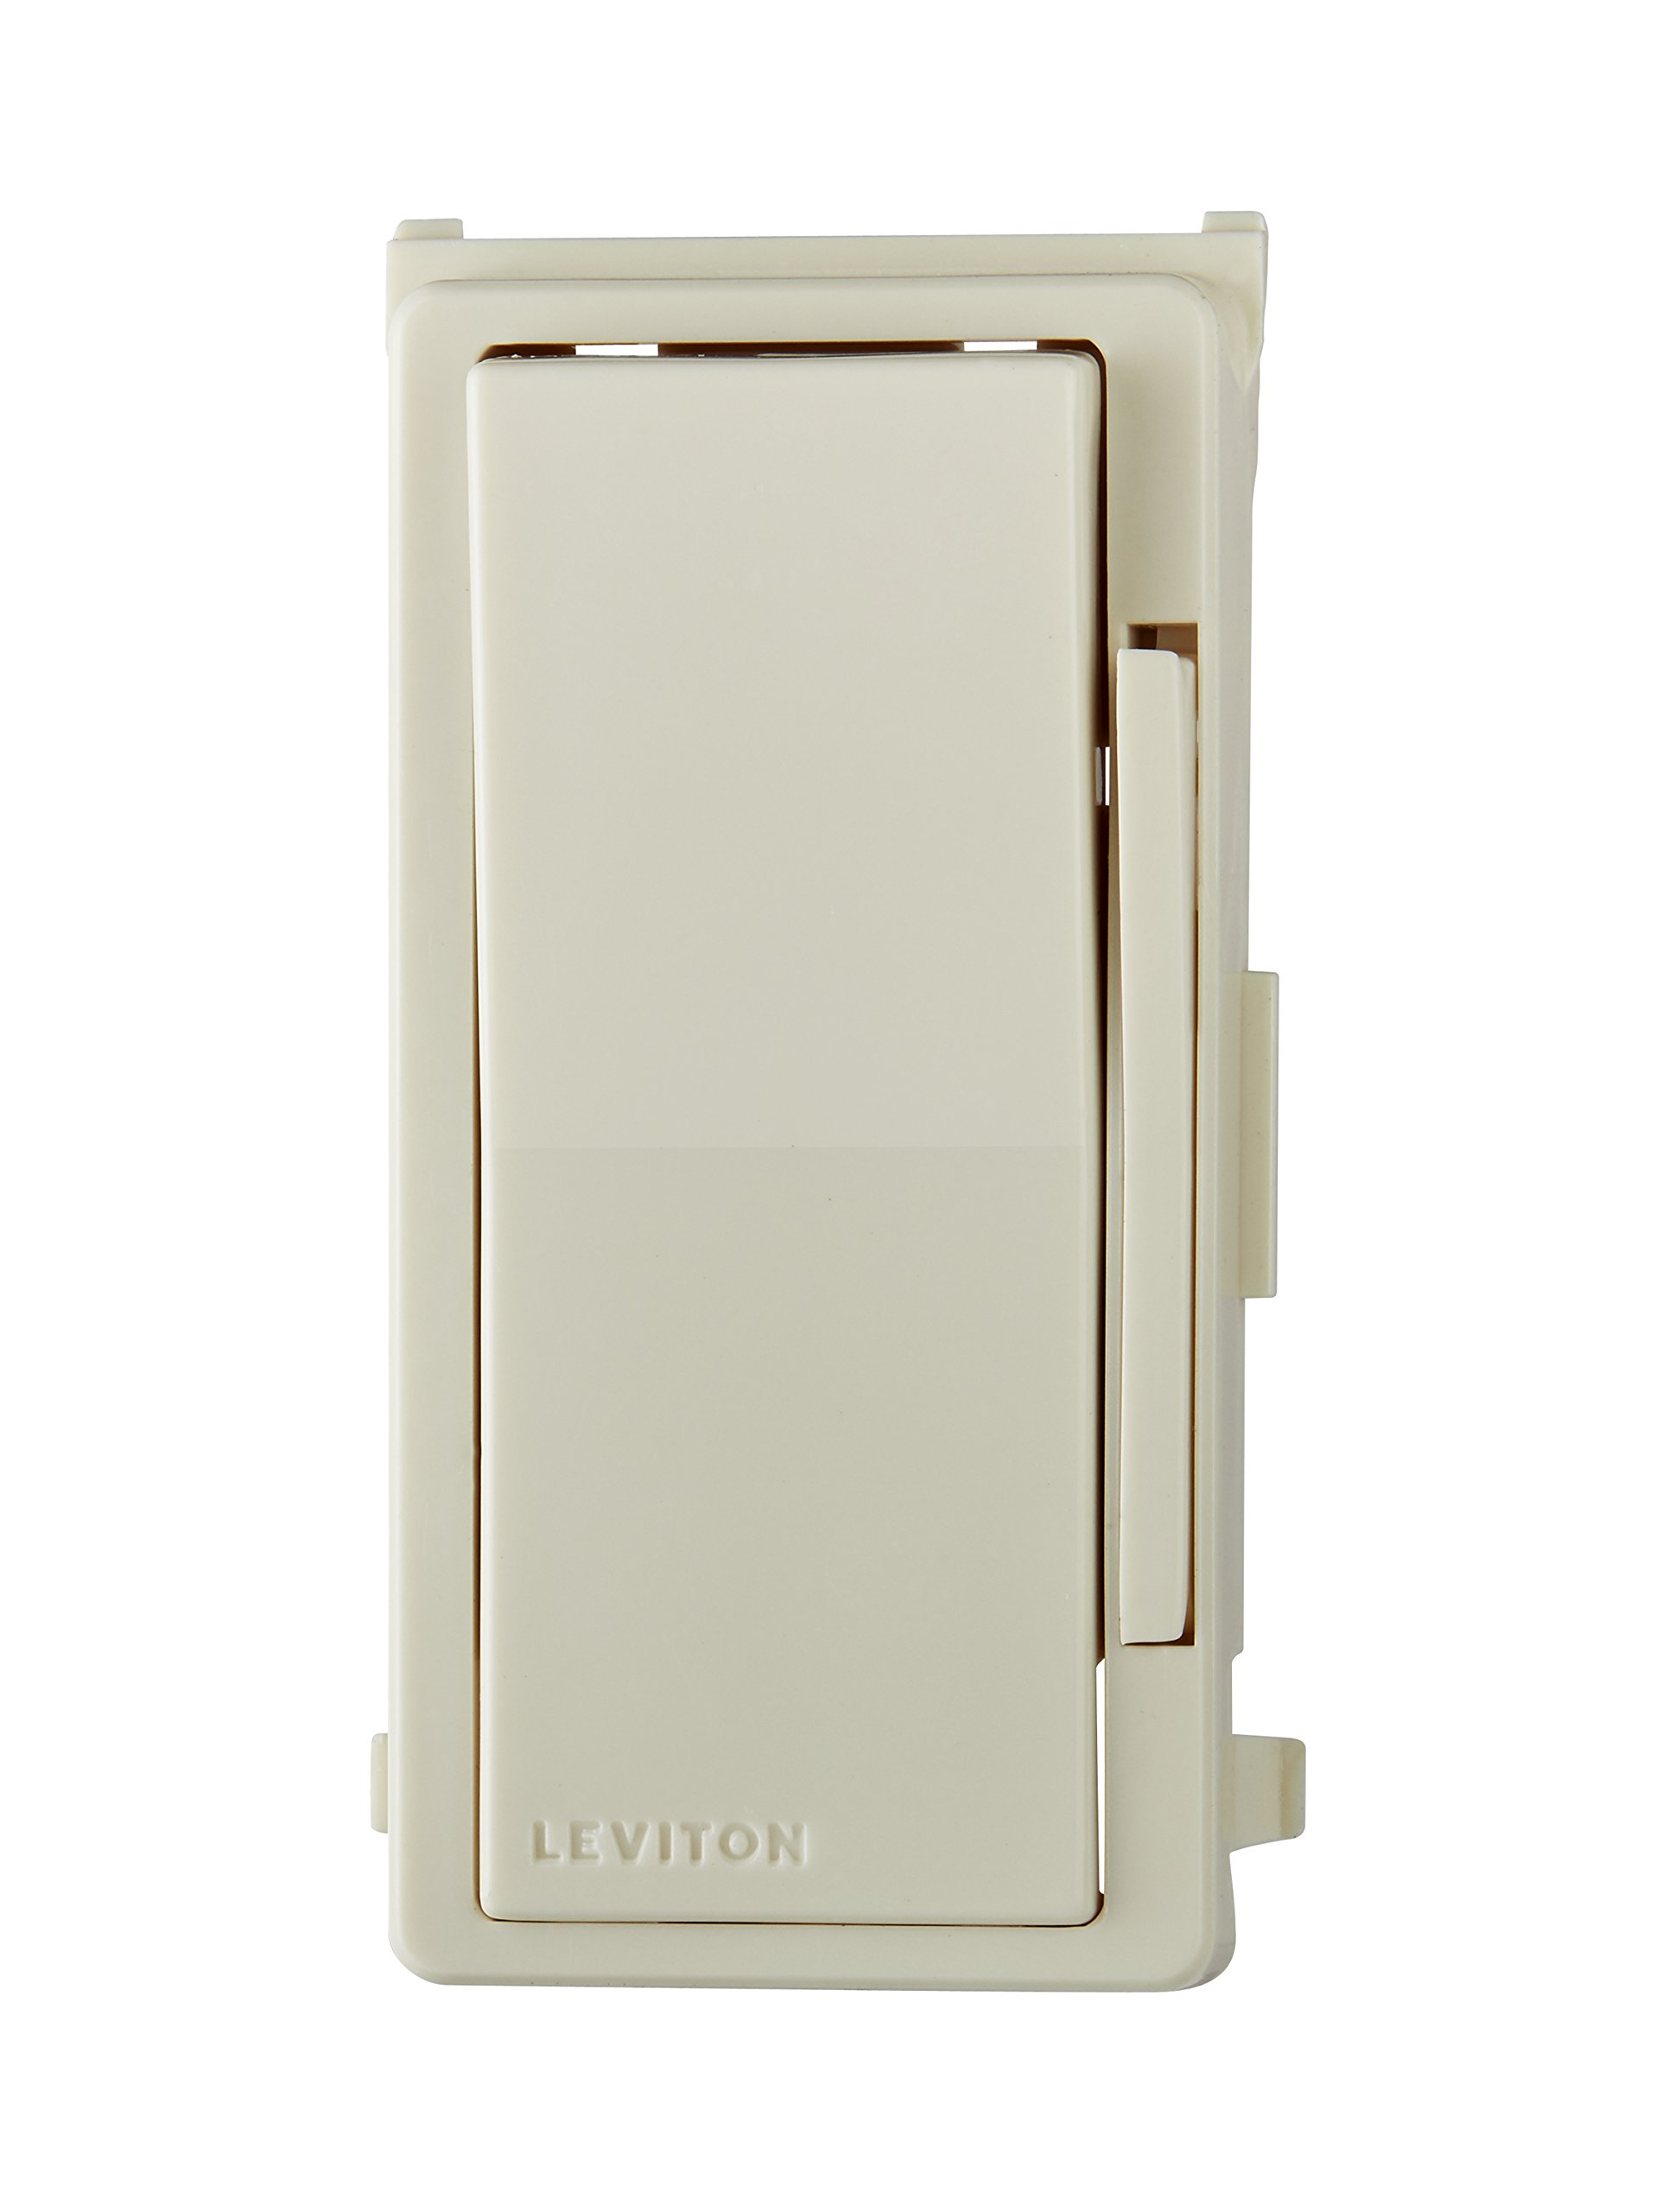 Leviton Decora Digital Dimmer Switch Color Change Faceplate with locator light, DDKIT-T, Light Almond